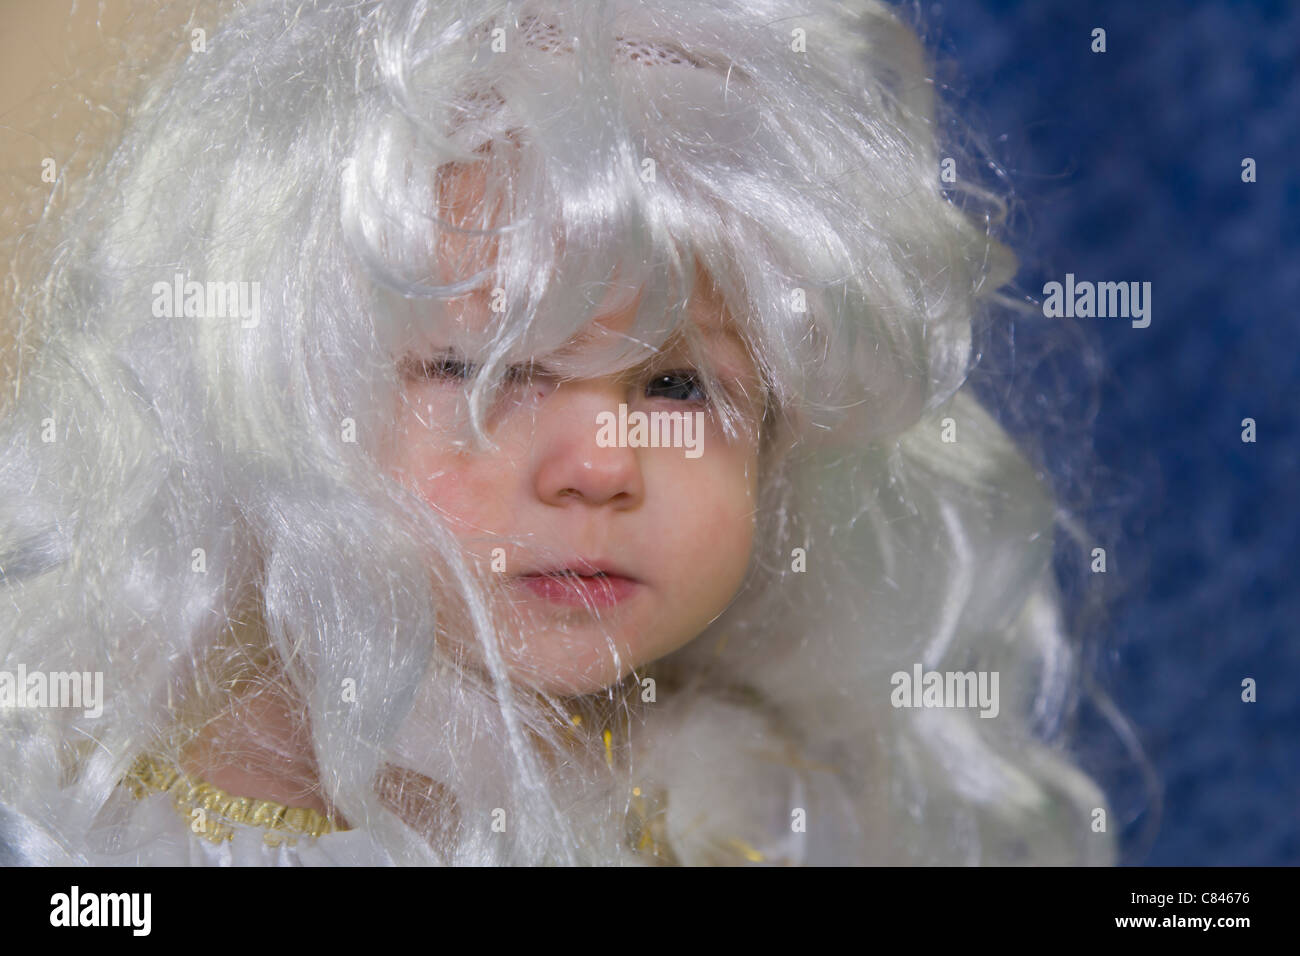 11 months old baby girl in angel dress and white wig Stock Photo